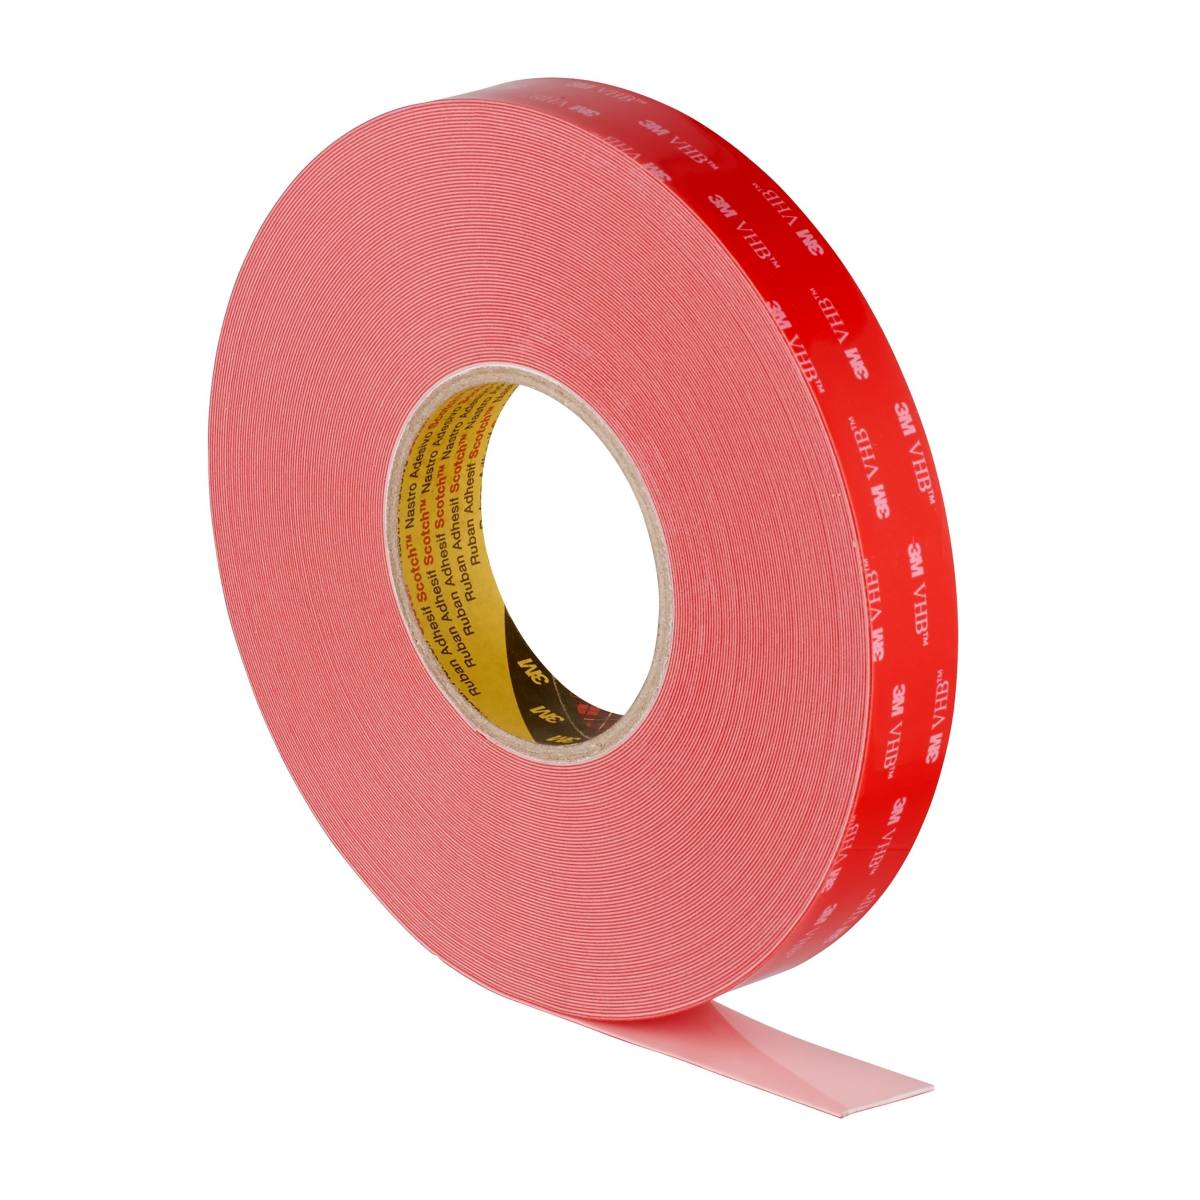 Very thin 3M 9472LE tesa double sided tapes foam tape 0.13MM